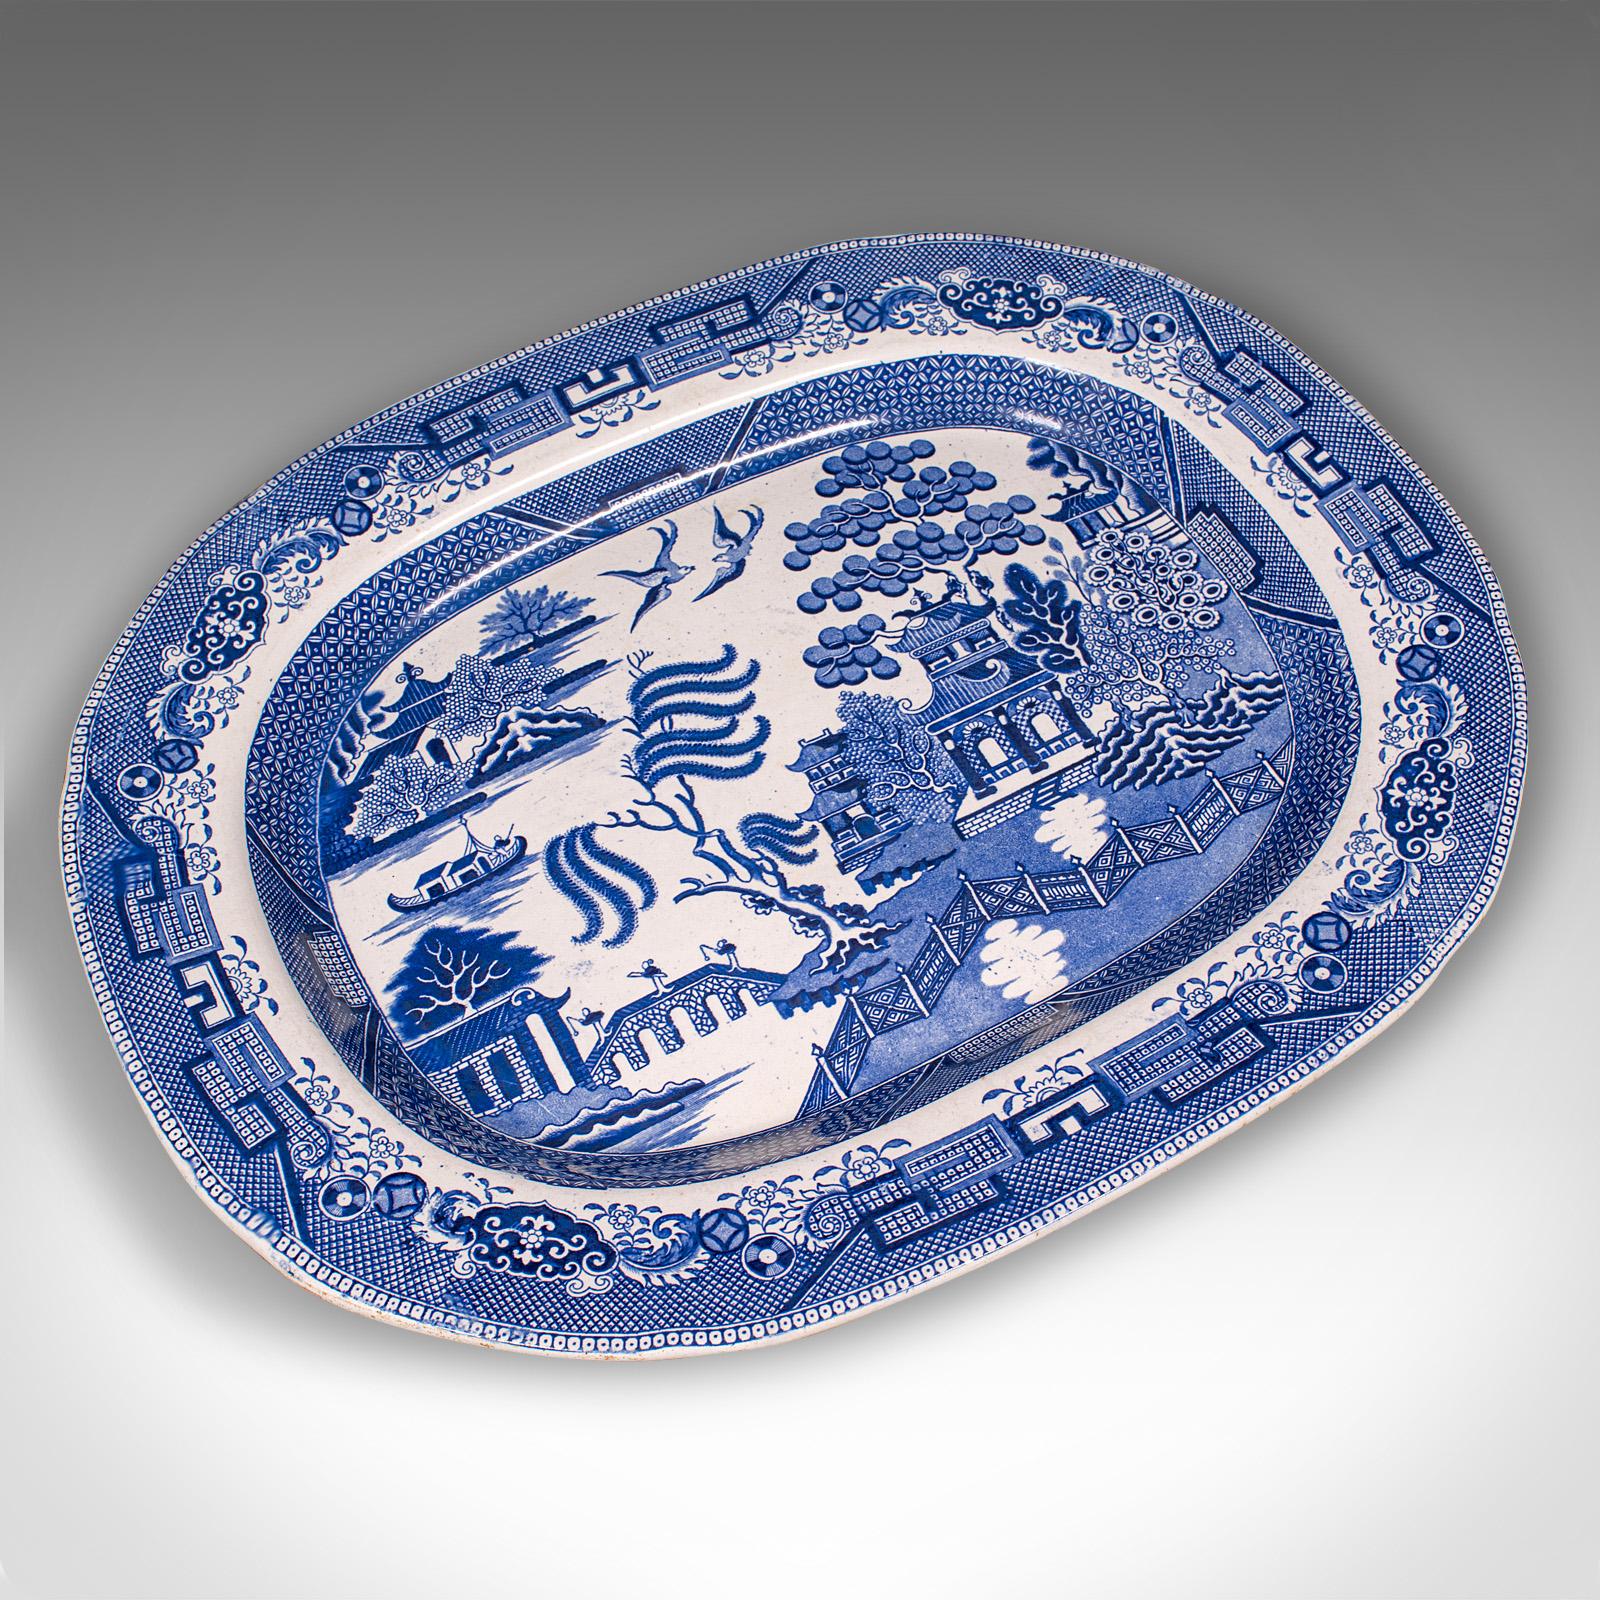 Antique Willow Pattern Serving Plate, English, Ceramic, Meat Dish, Victorian For Sale 1